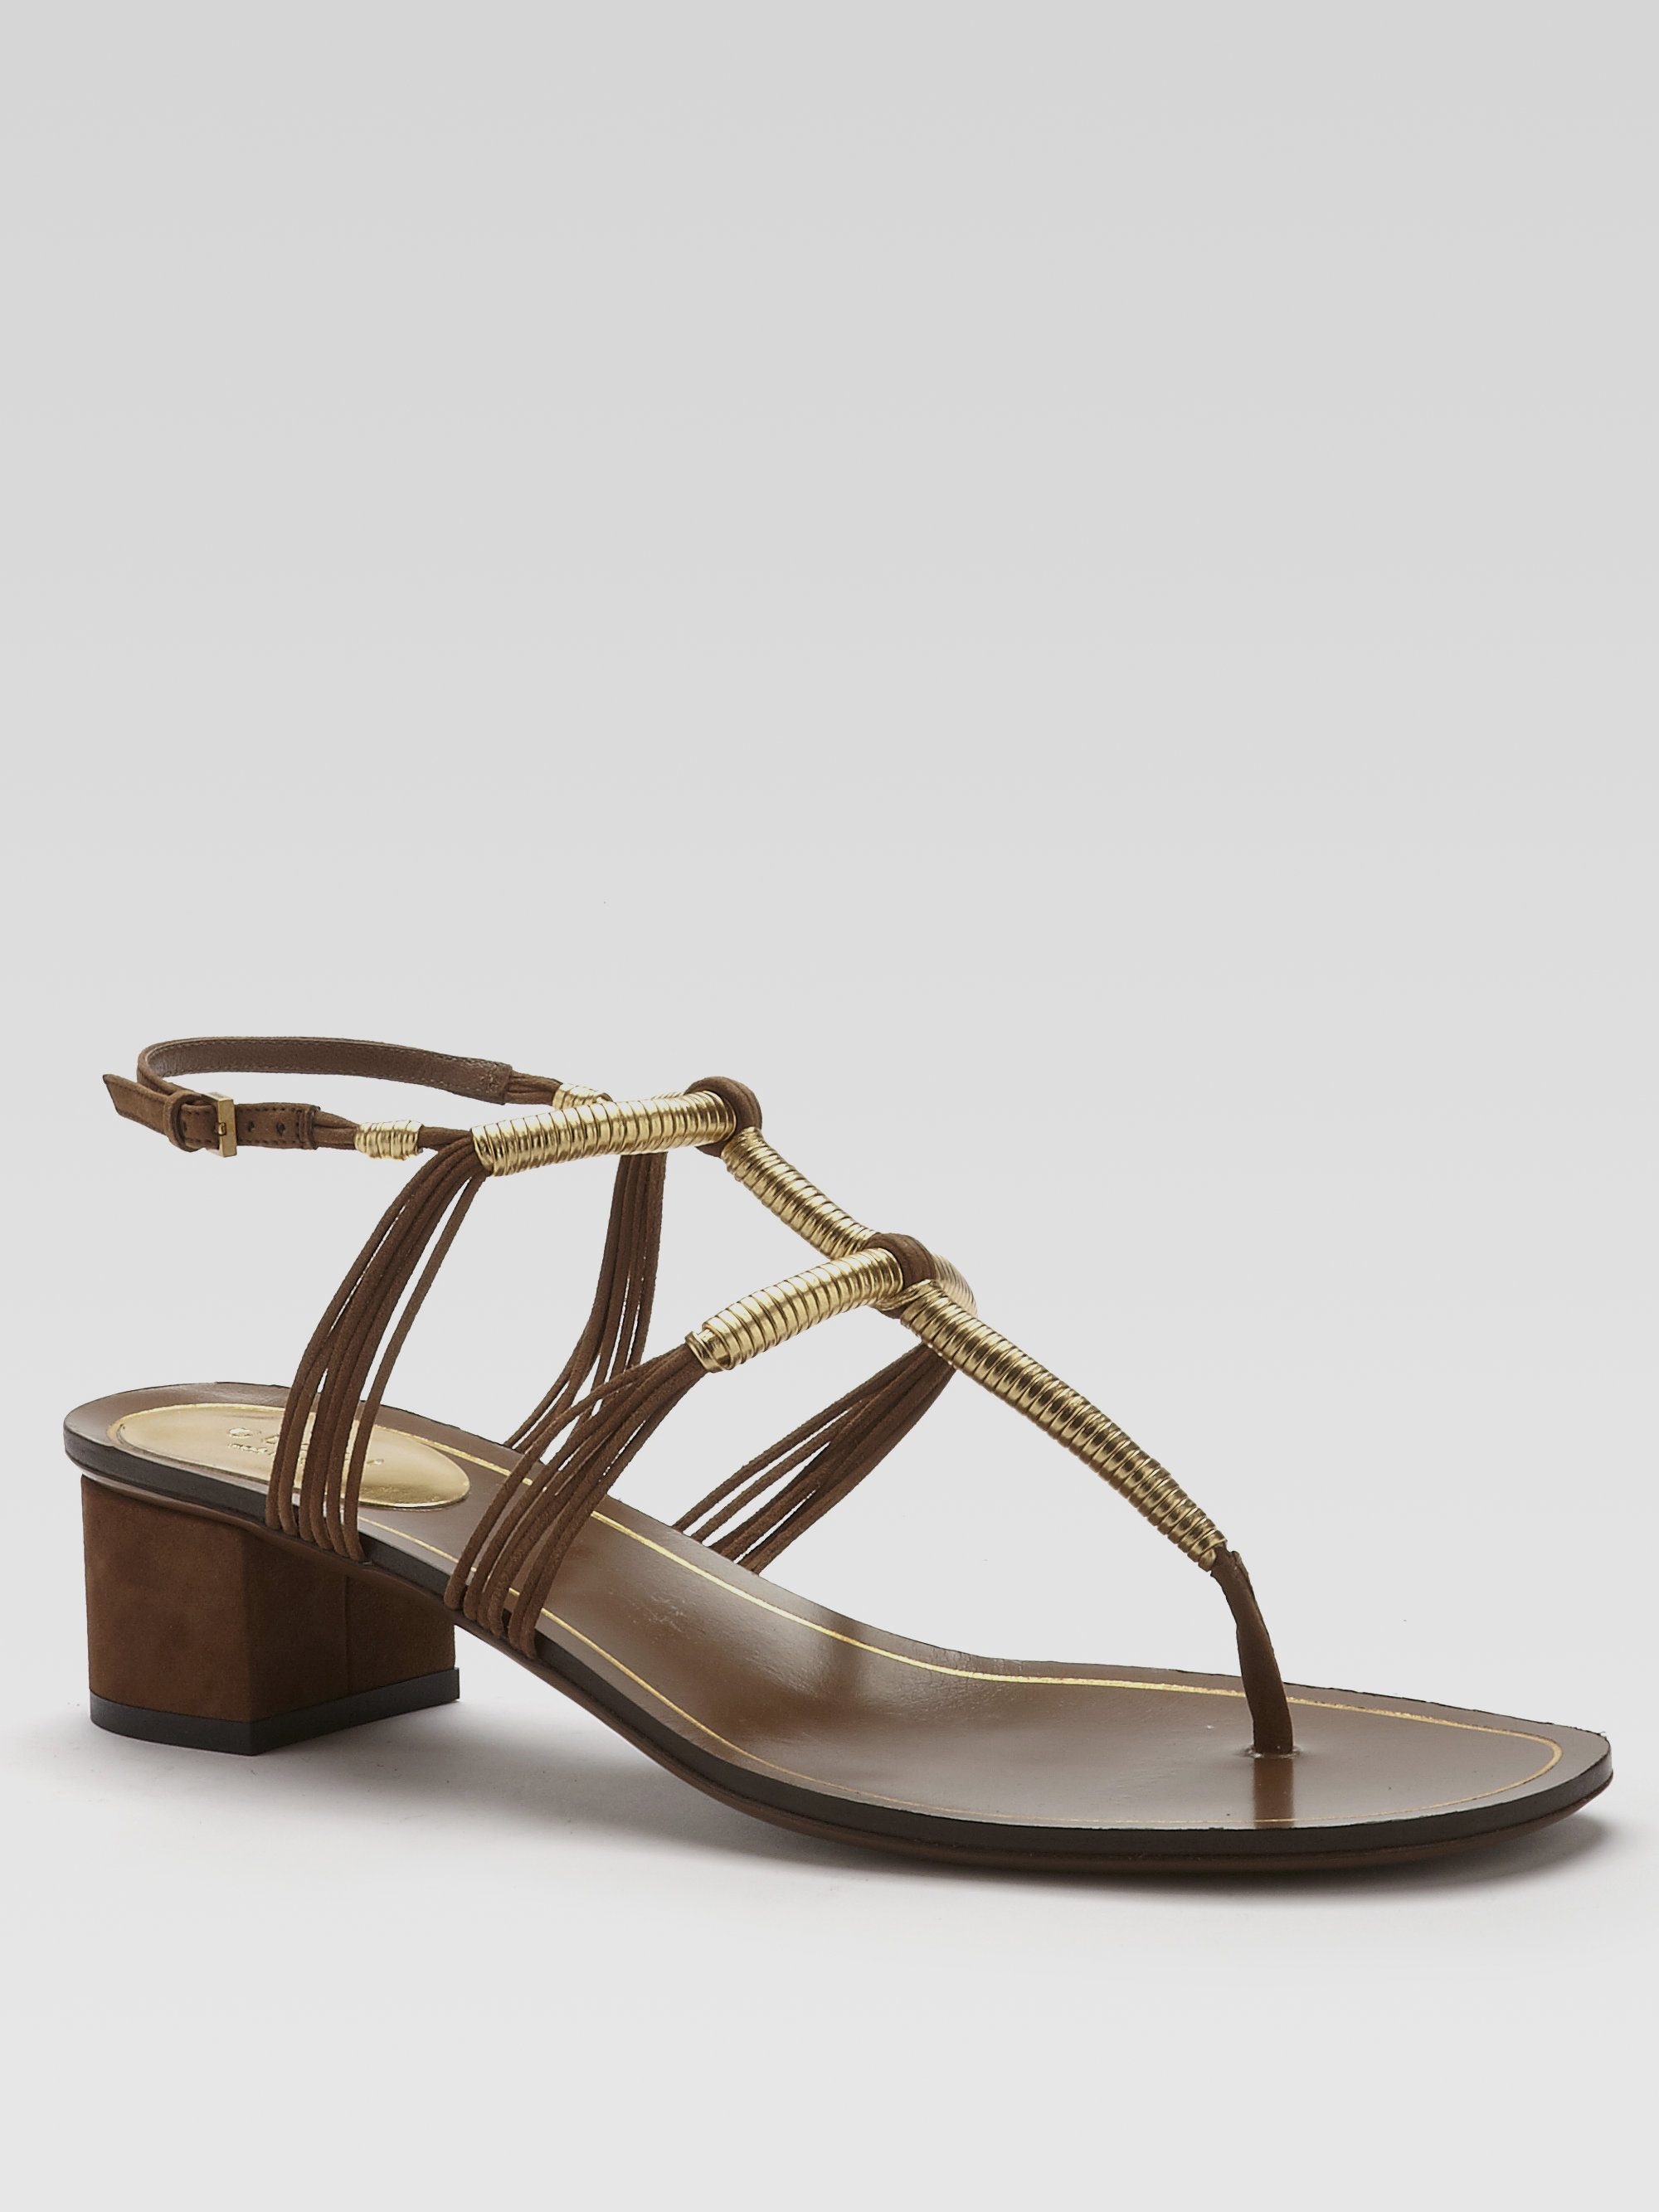 Gucci Anita Metallic Leather Suede Thong Sandals in Brown